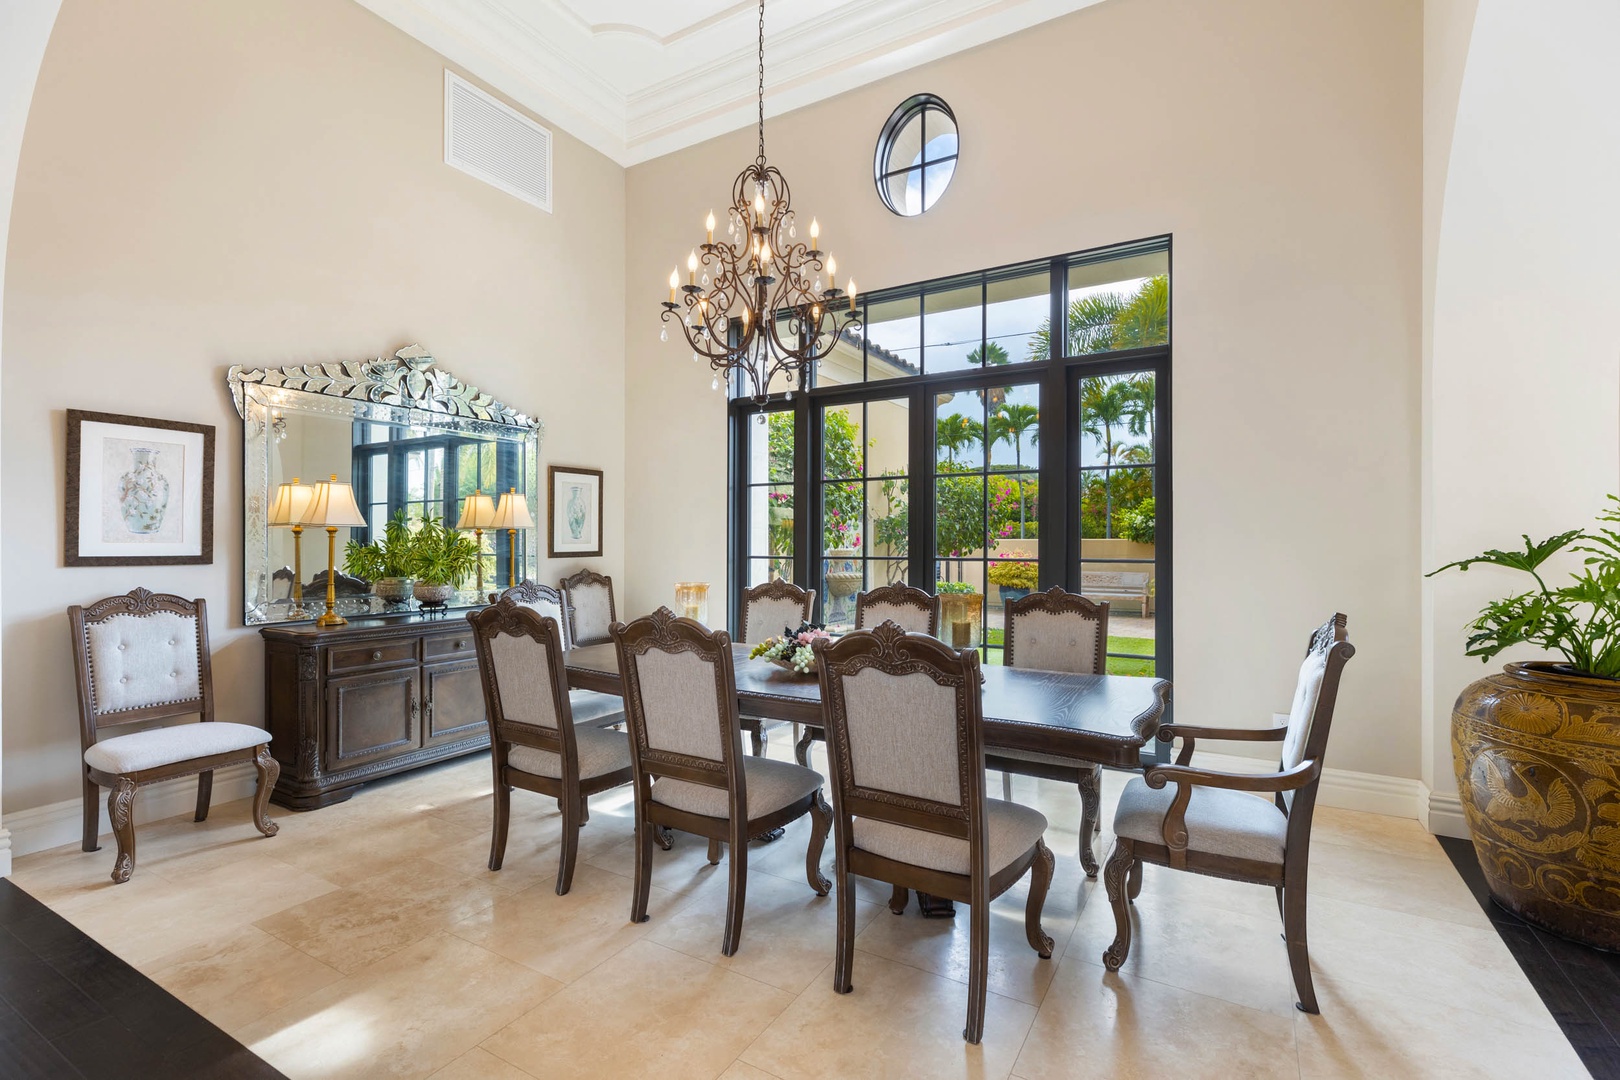 Honolulu Vacation Rentals, The Kahala Mansion - Dining area with table for eight right off the formal living area for evening meals.